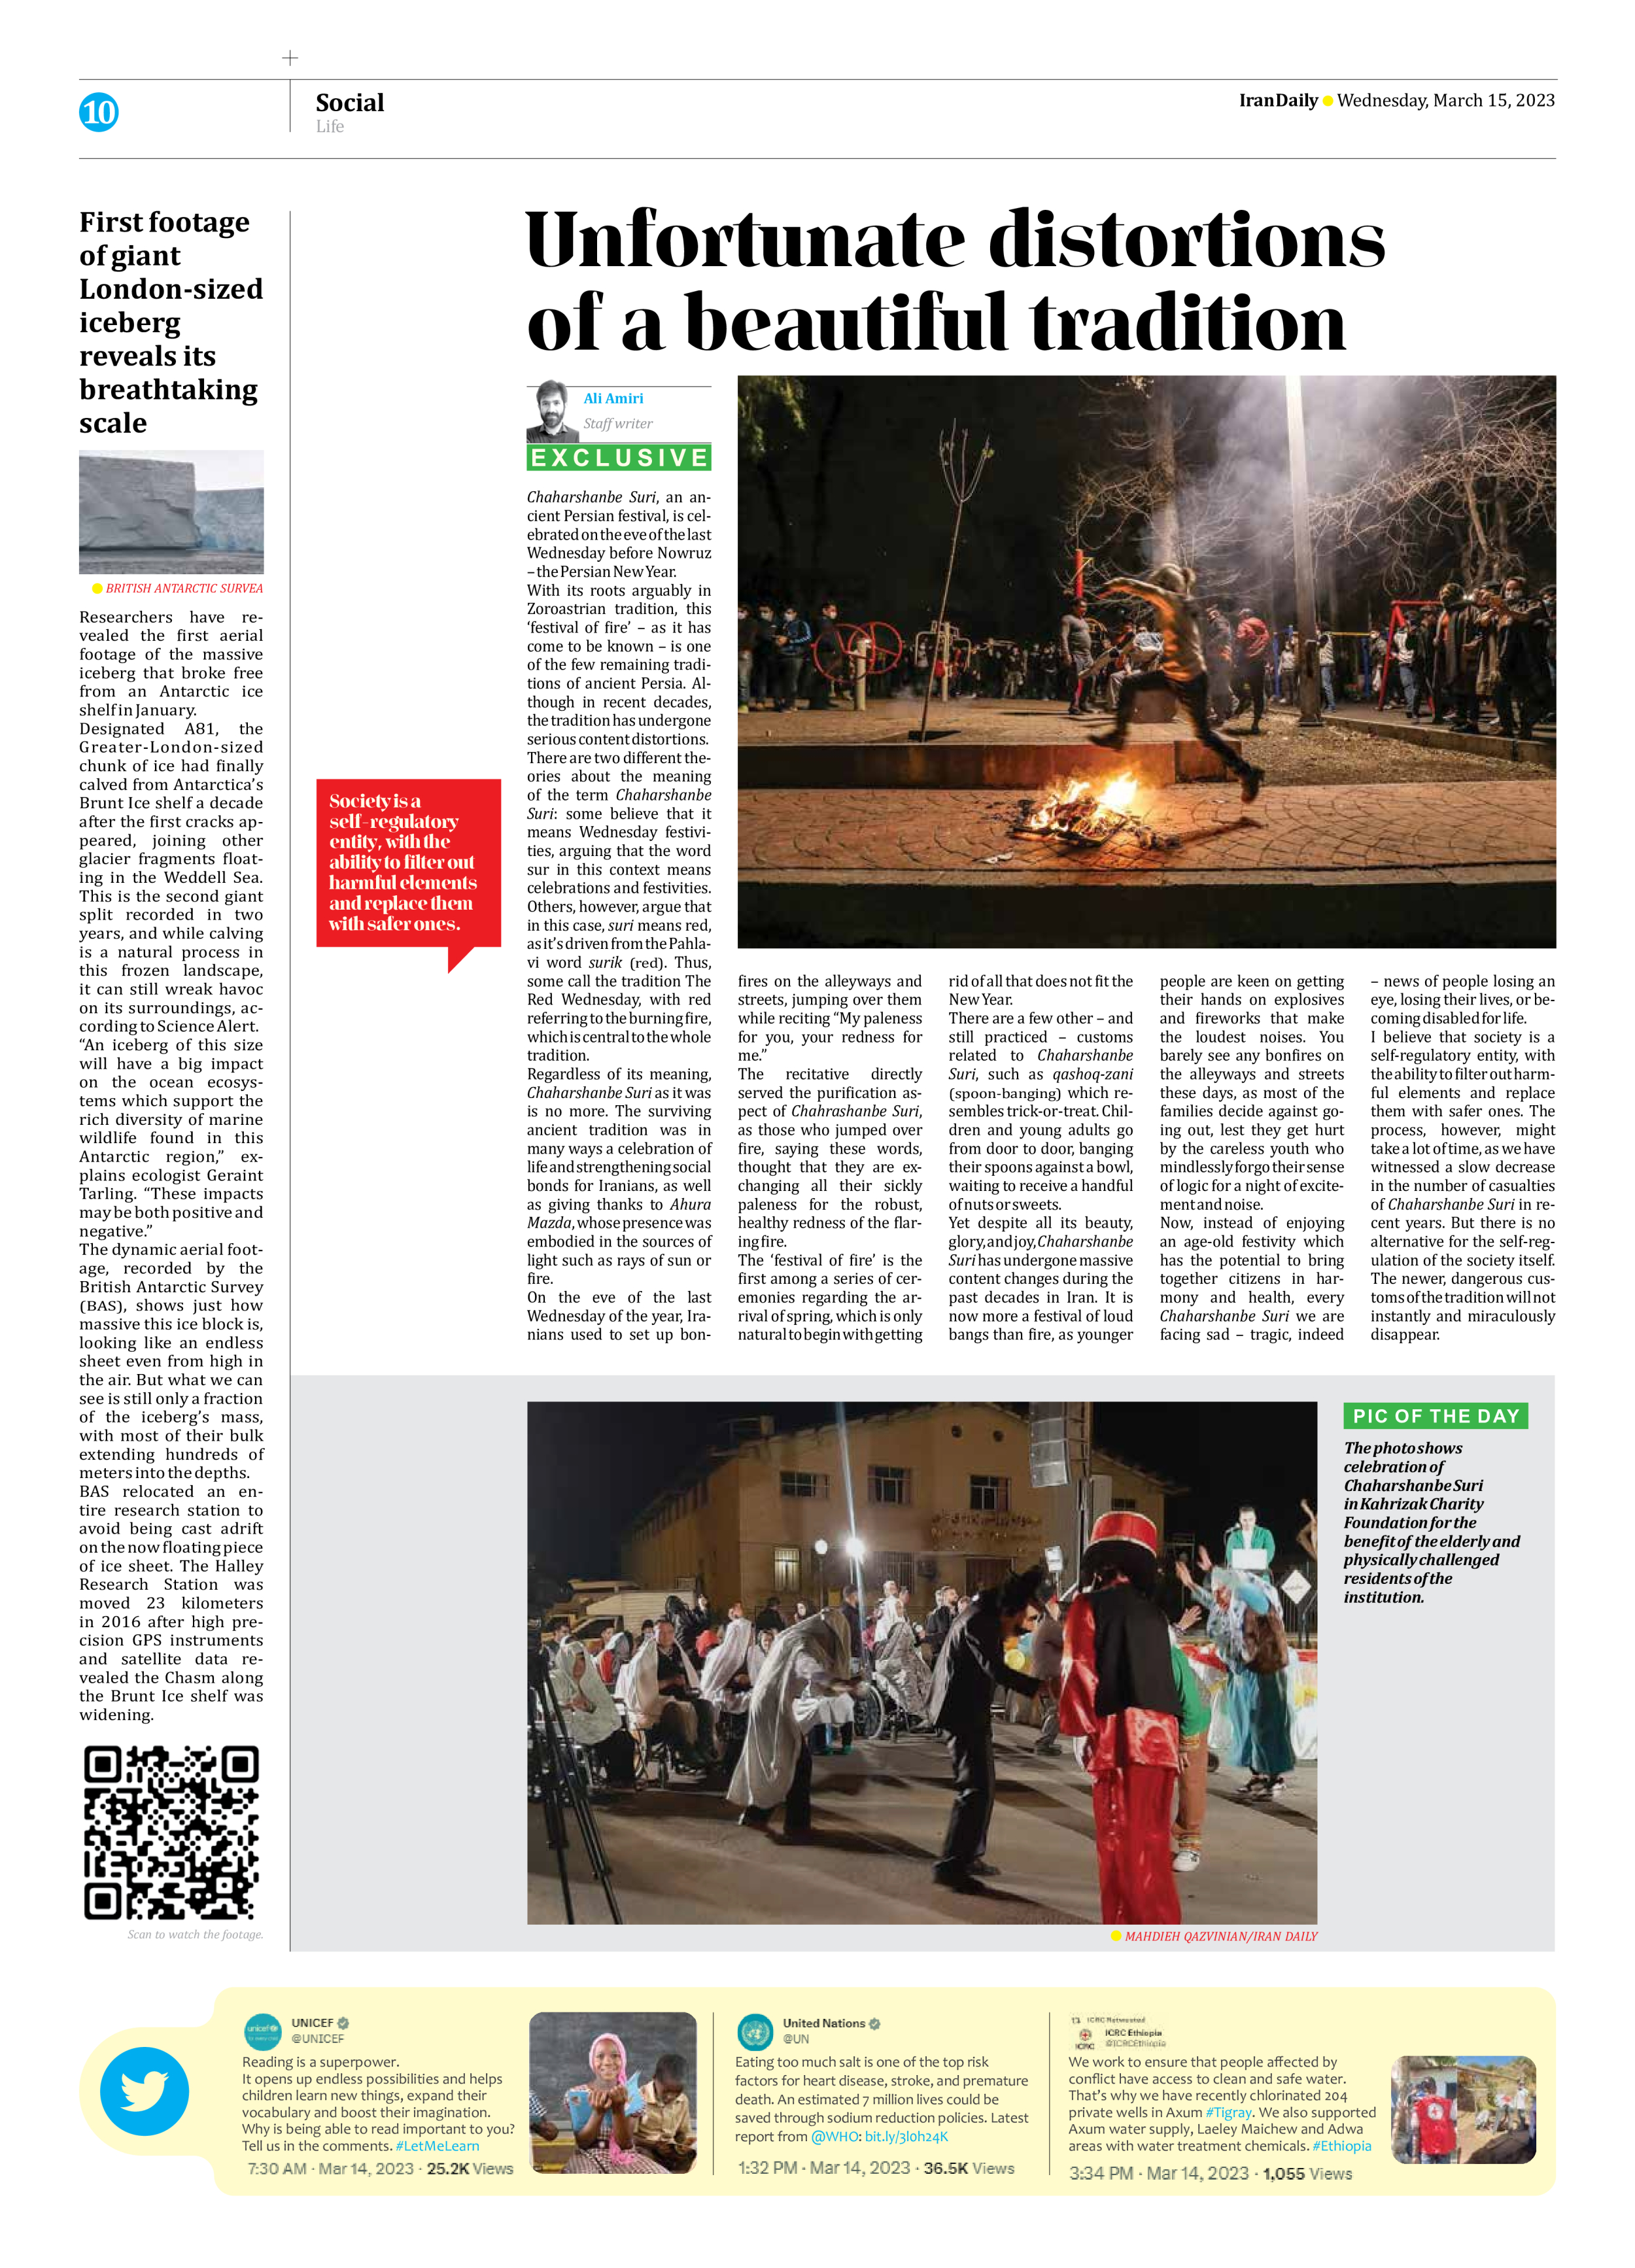 Iran Daily - Number Seven Thousand Two Hundred and Fifty Eight - 15 March 2023 - Page 10